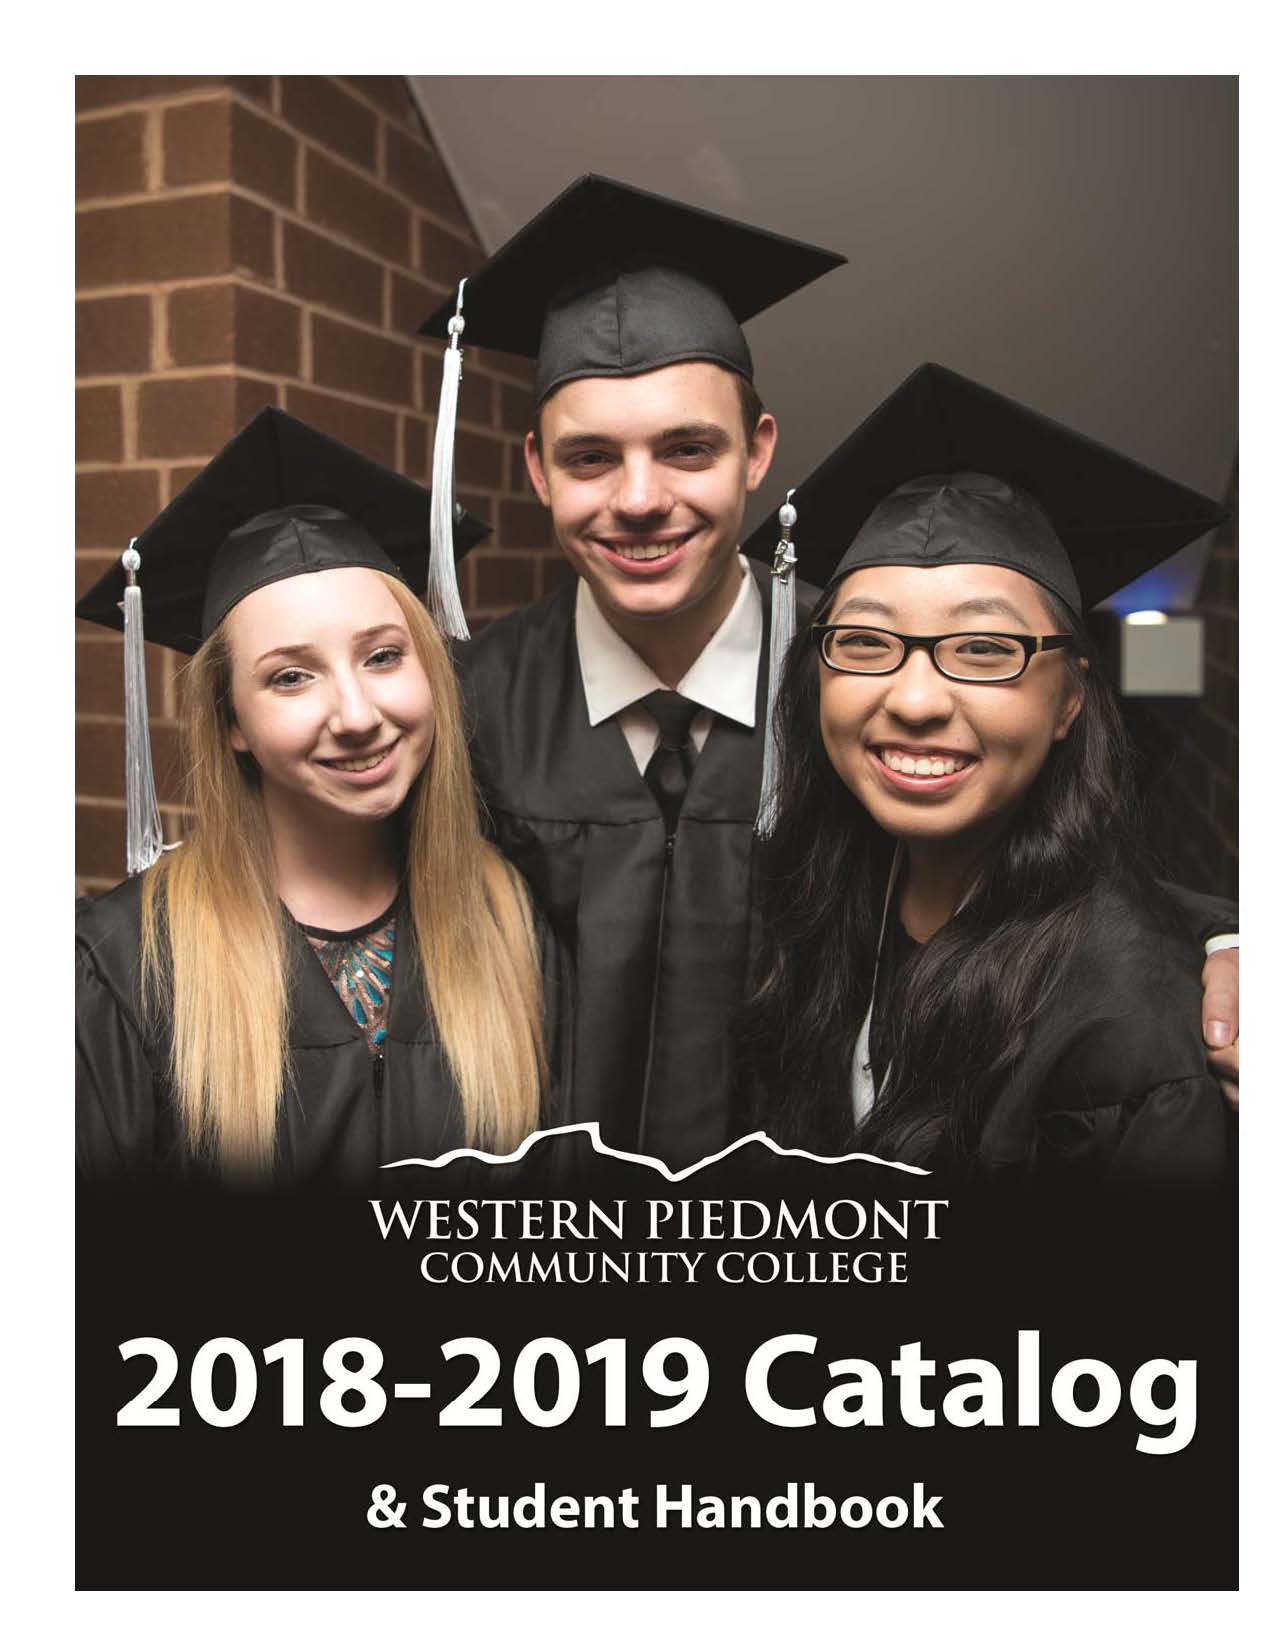 2018-2019 WPCC Catalog cover showing students at graduation.